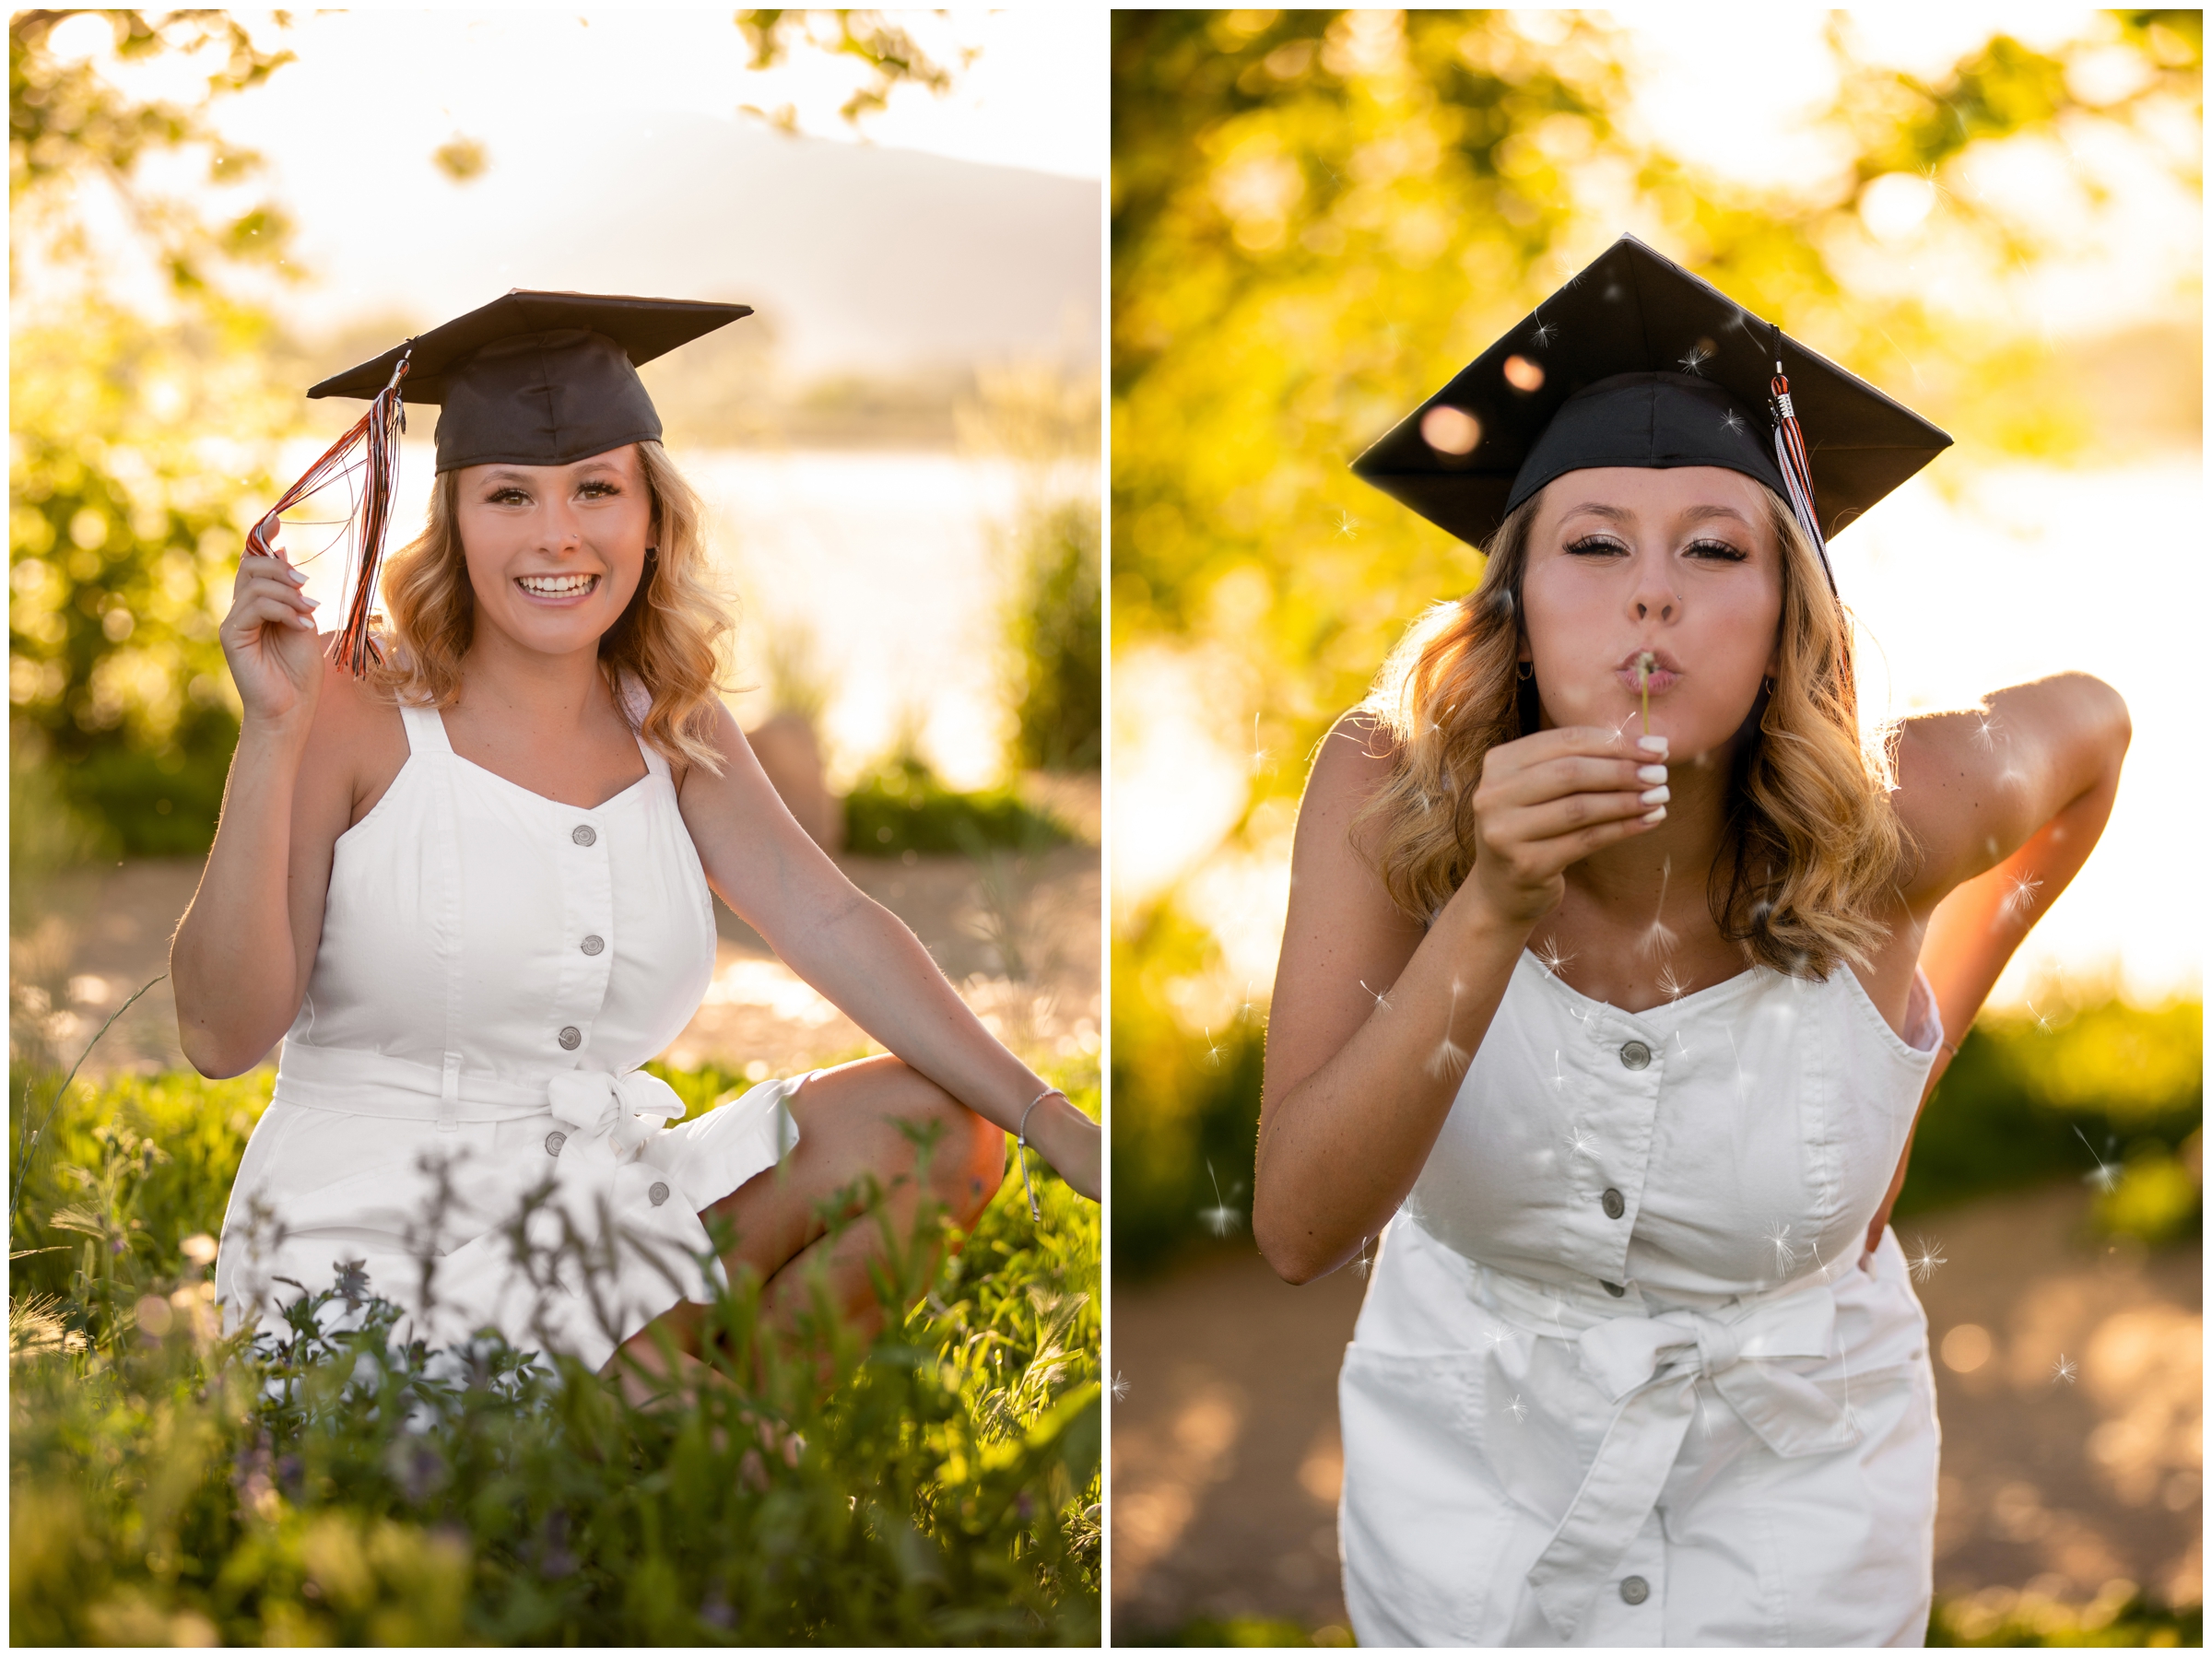 Teen girl blowing on dandelion during cap and gown graduation photos in boulder Colorado